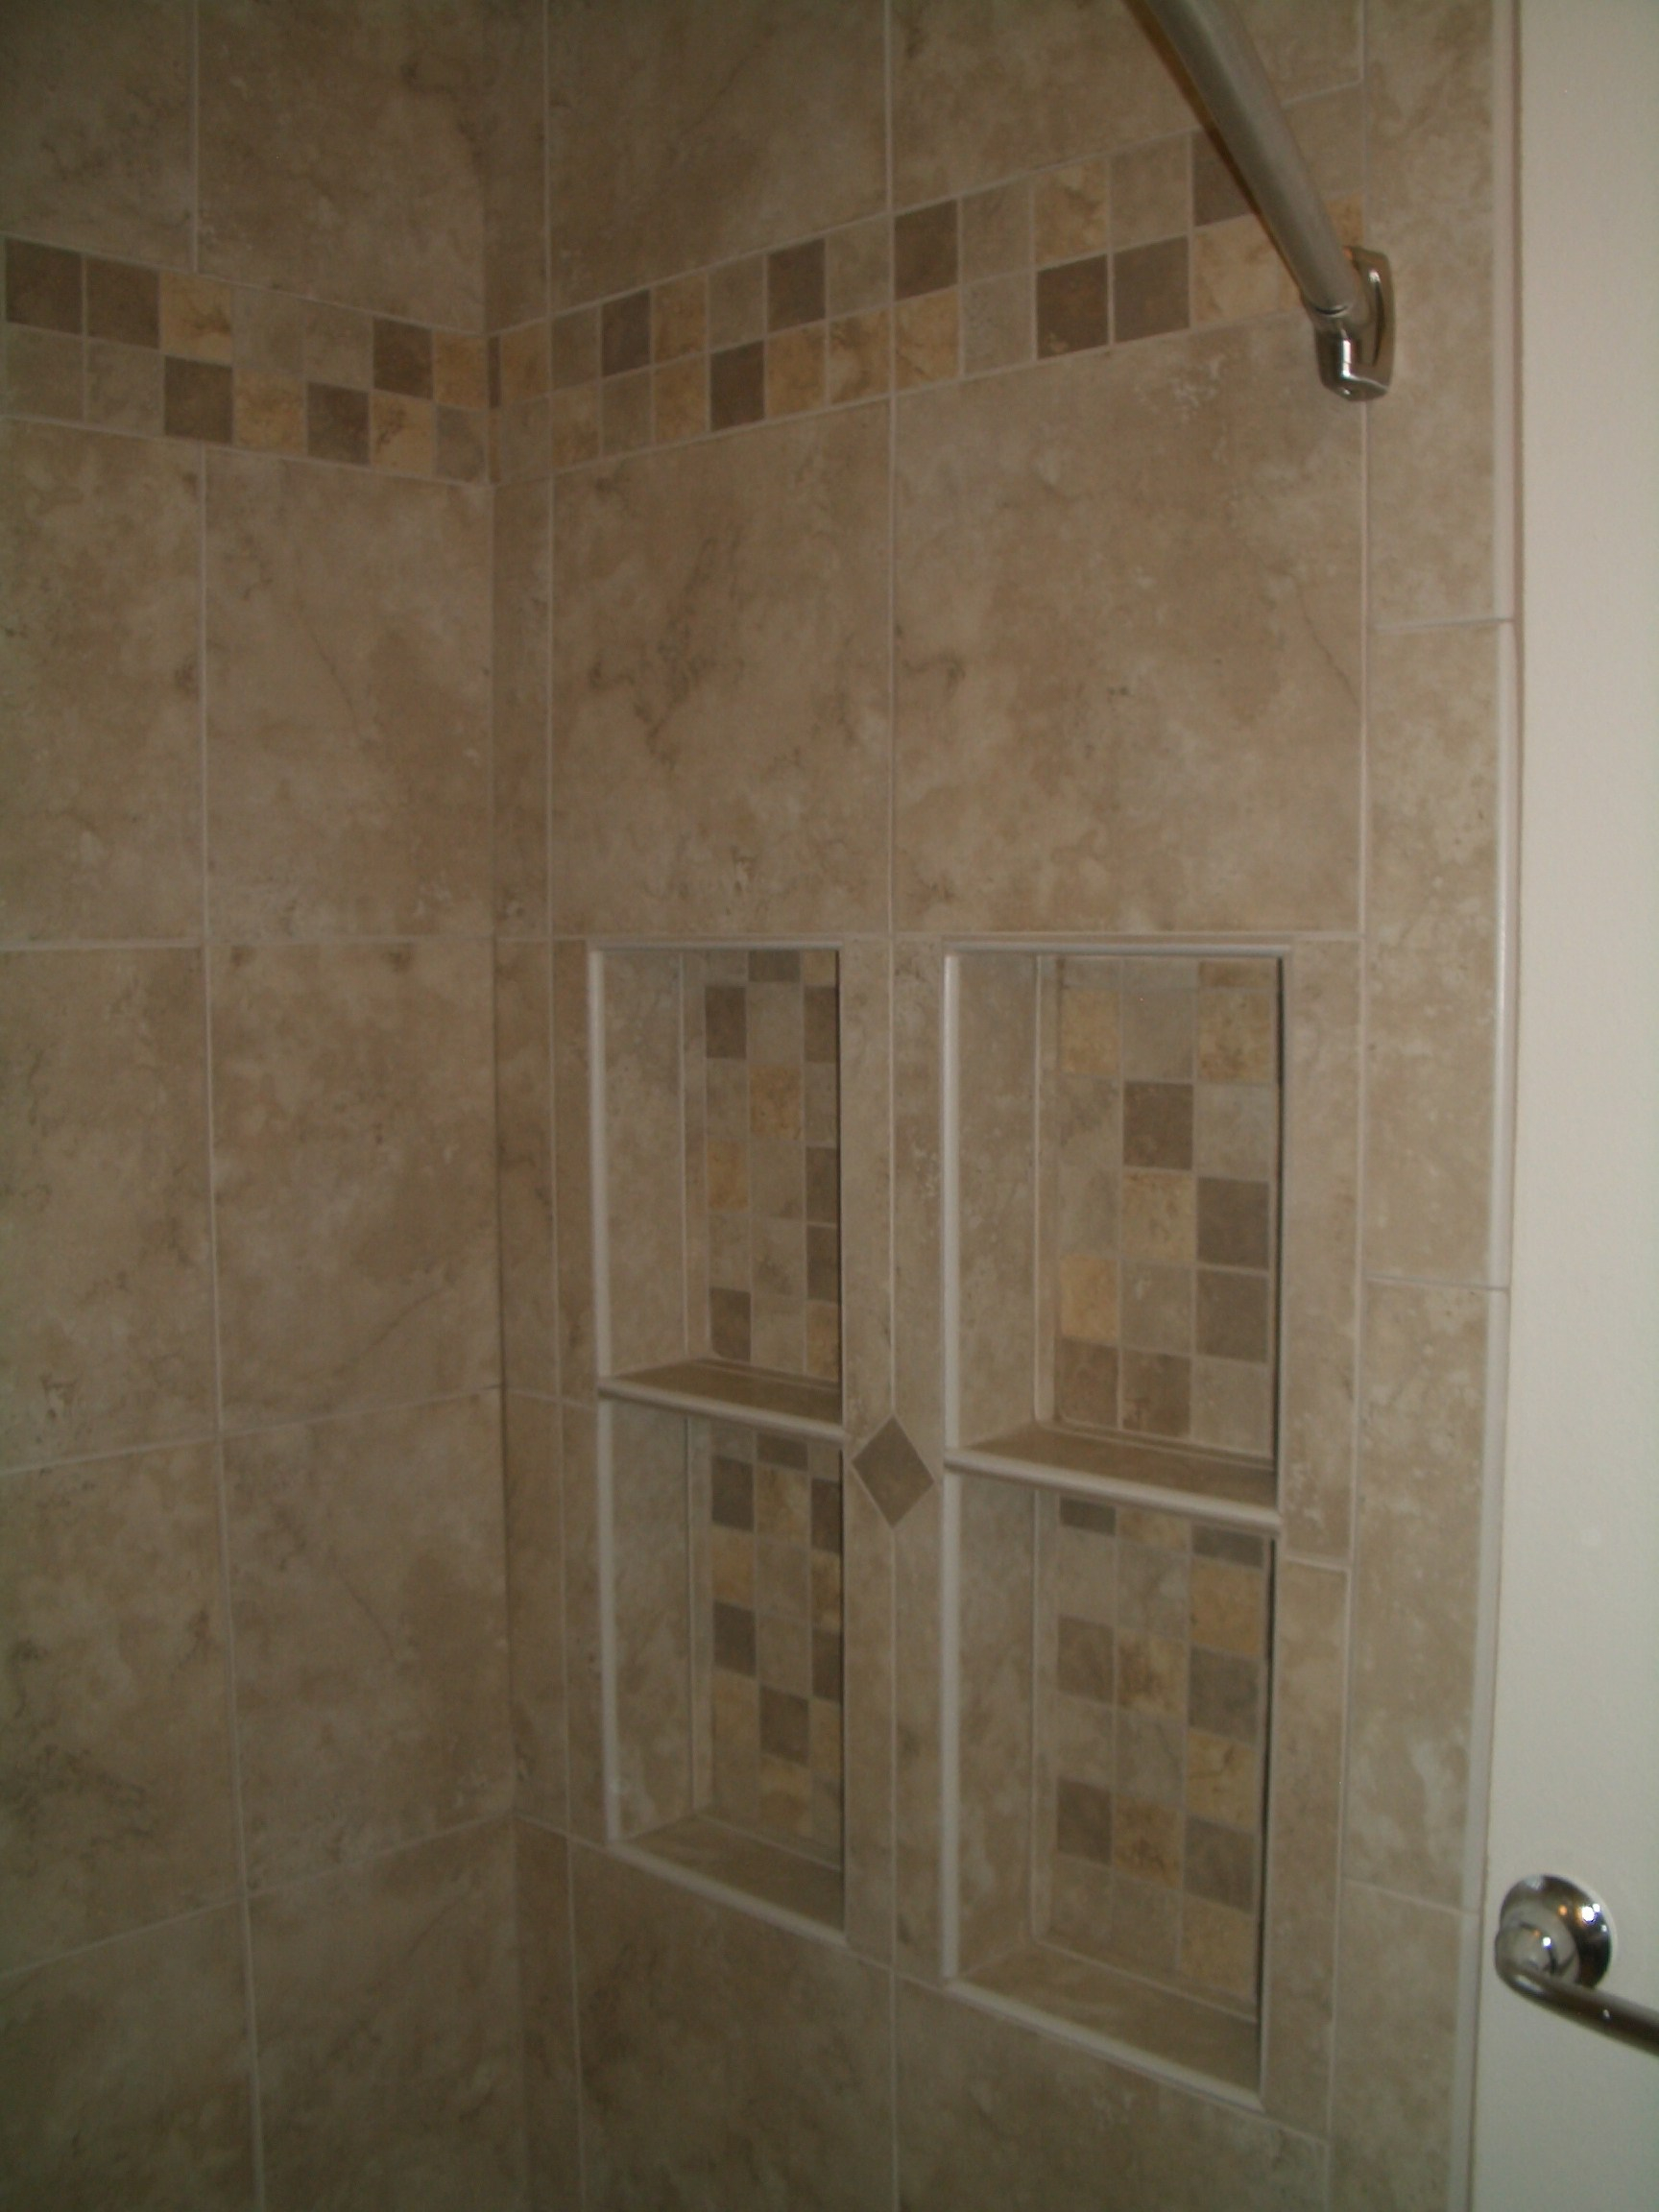 Drywall To Backerboard Transition In Tiled Showers intended for dimensions 1728 X 2304